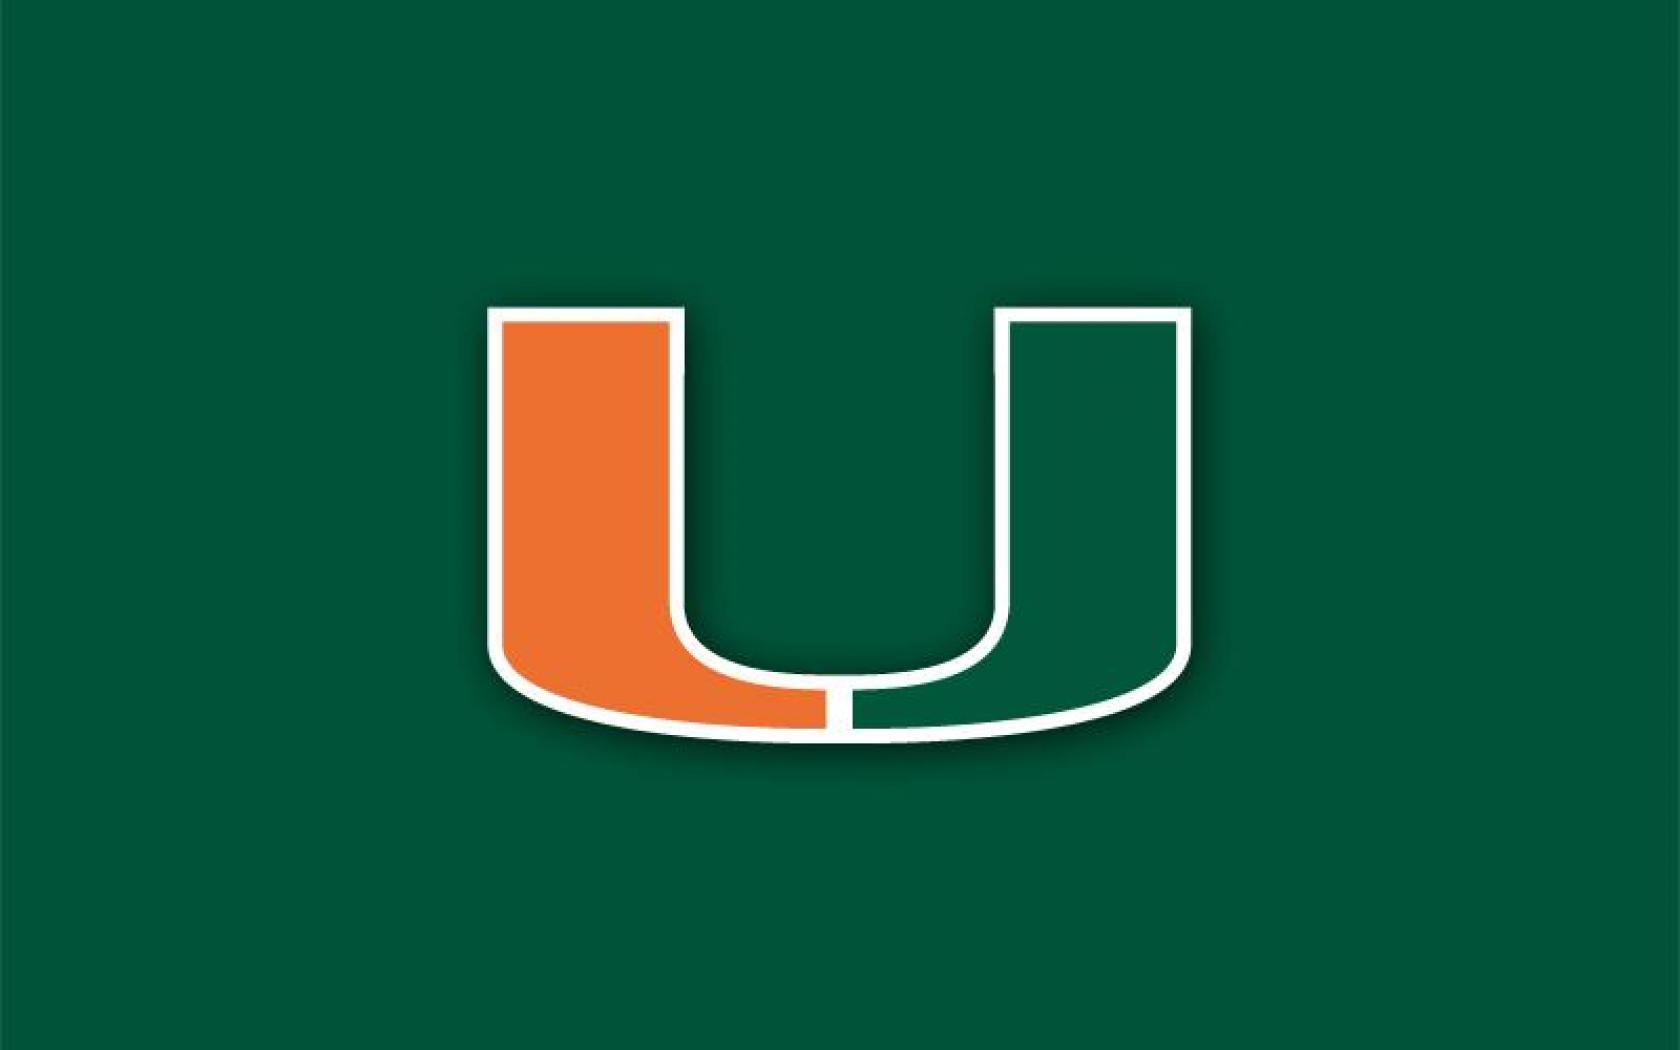 University Of Miami Logo High Quality And Resolution